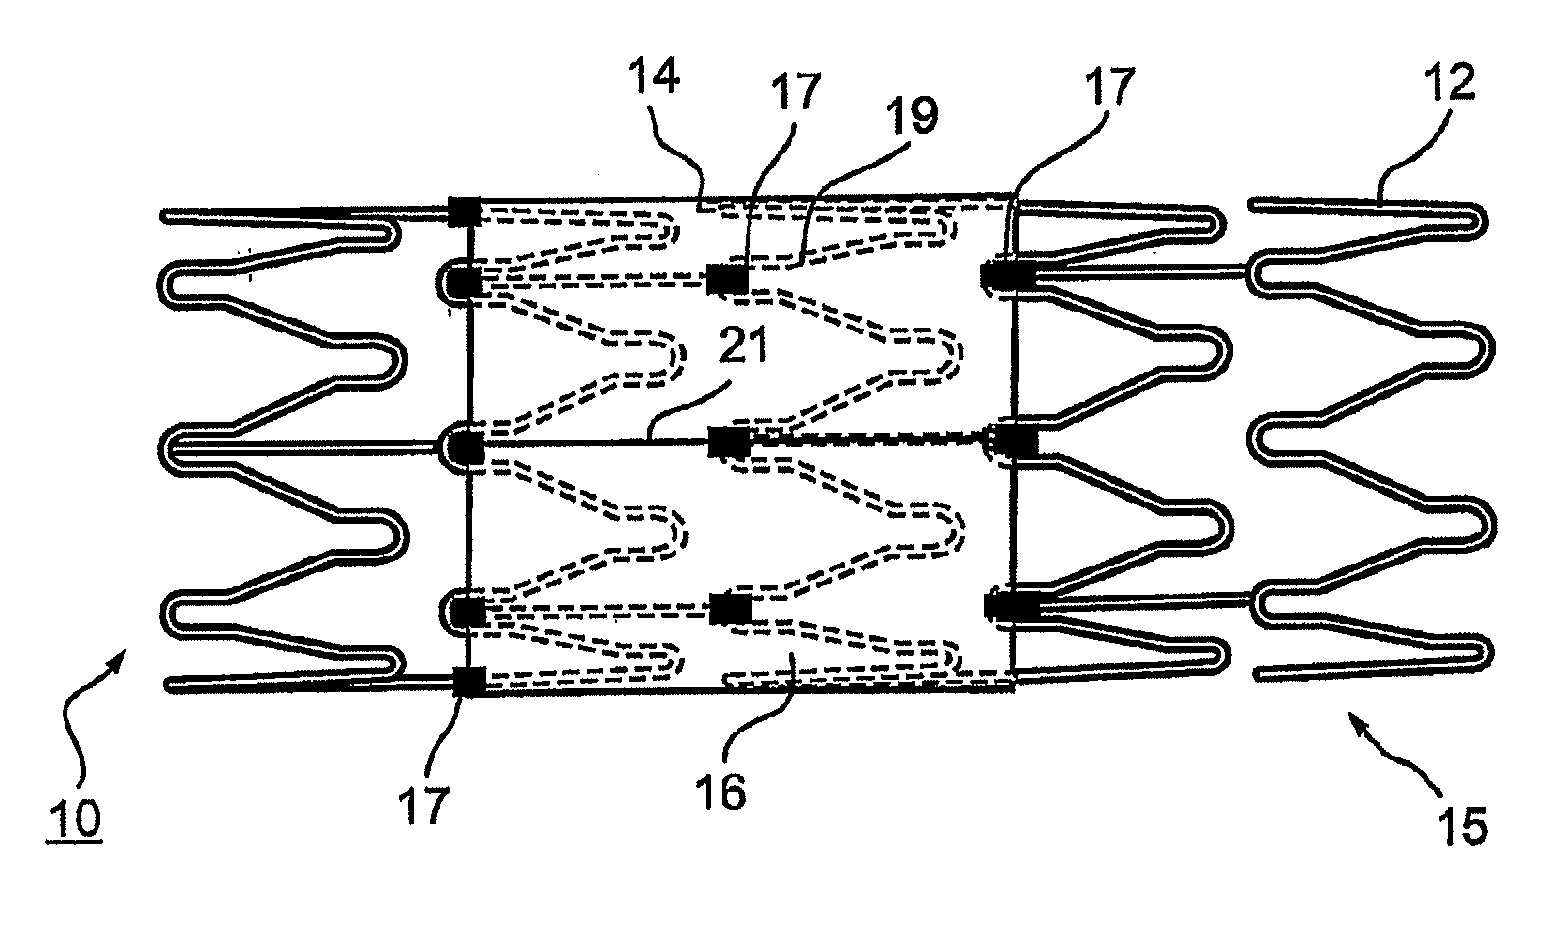 Implantable graft assembly and aneurysm treatment